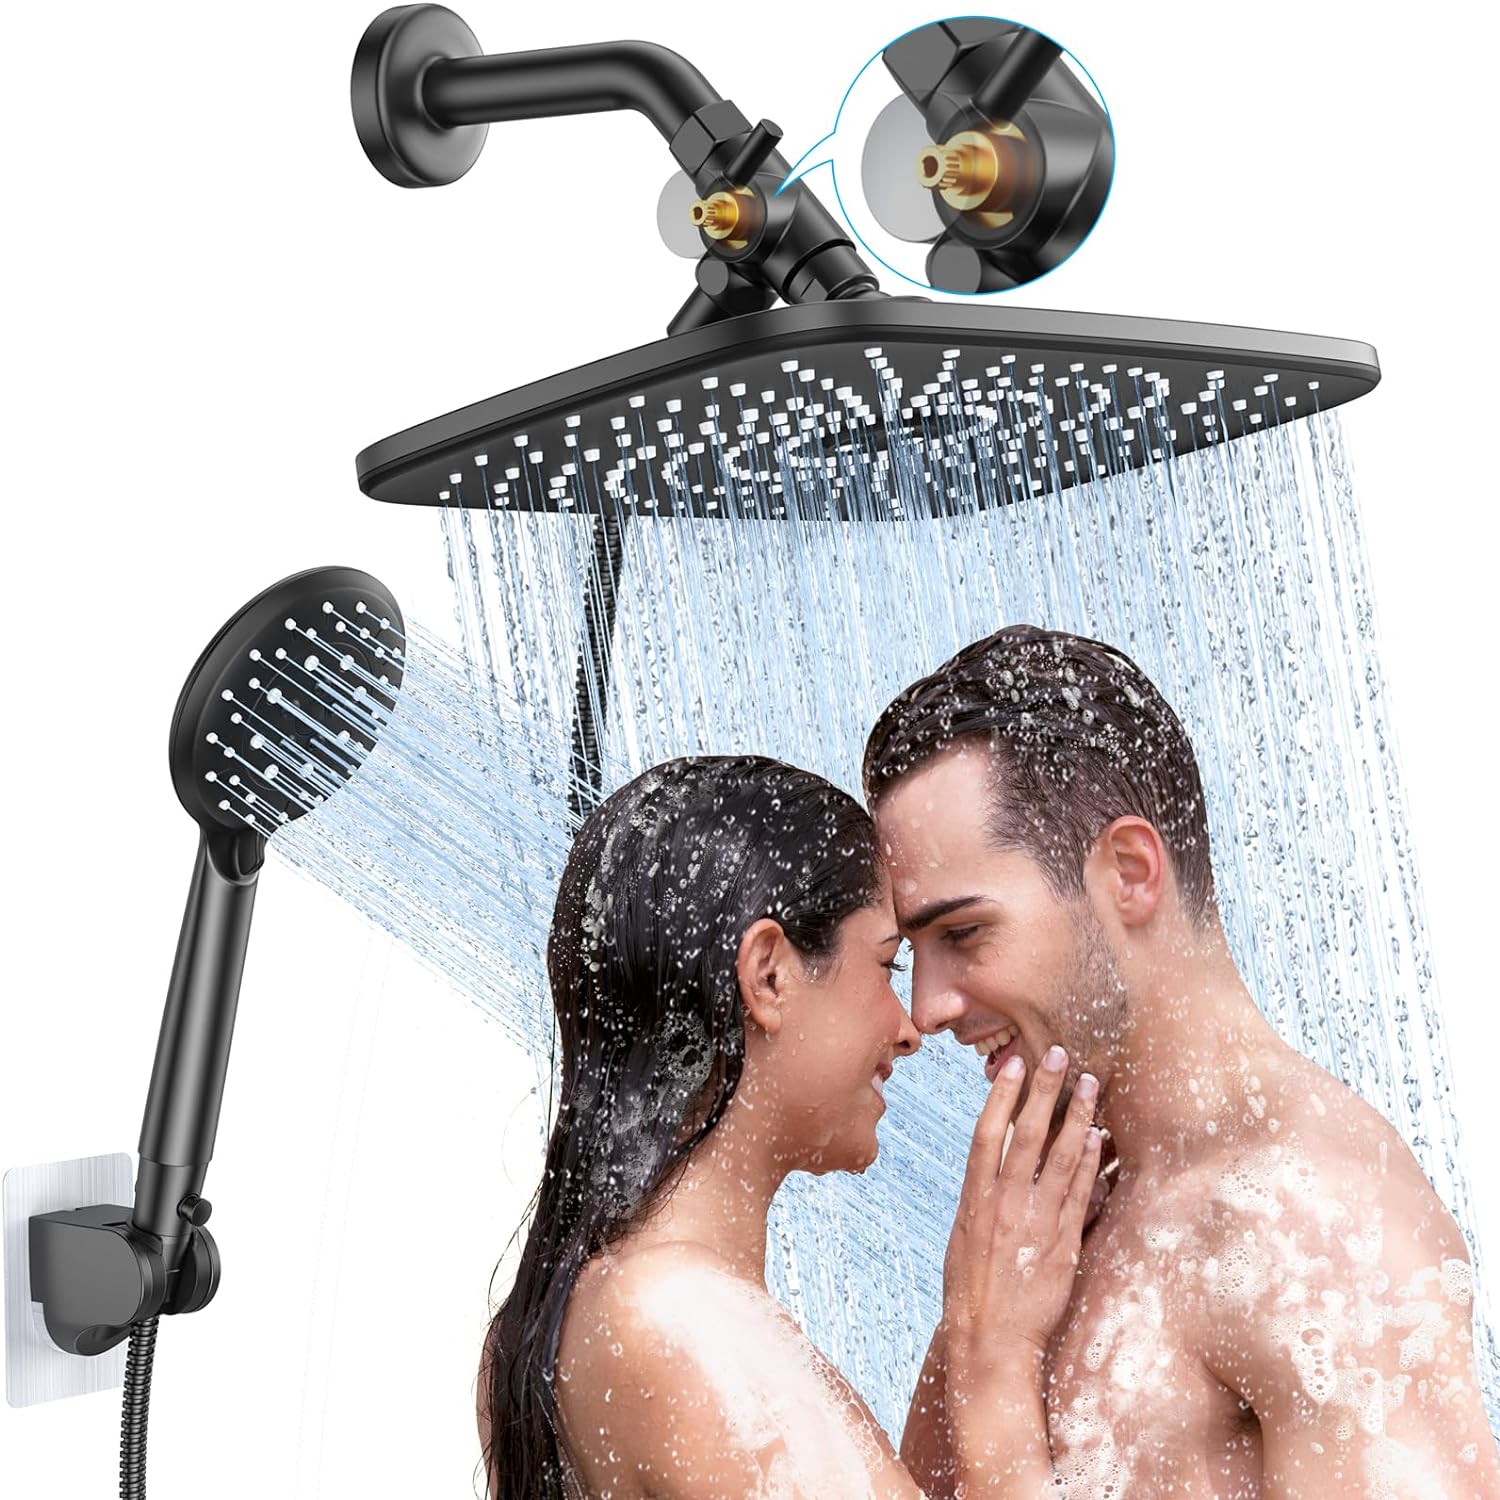 Veken 12 Inch High Pressure Rain Shower Head -Shower Heads with 5 Modes Handheld Spray Combo- Wide RainFall shower with 70 Hose - Adjustable Dual Showerhead with Anti-Clog Nozzles- Matte Black